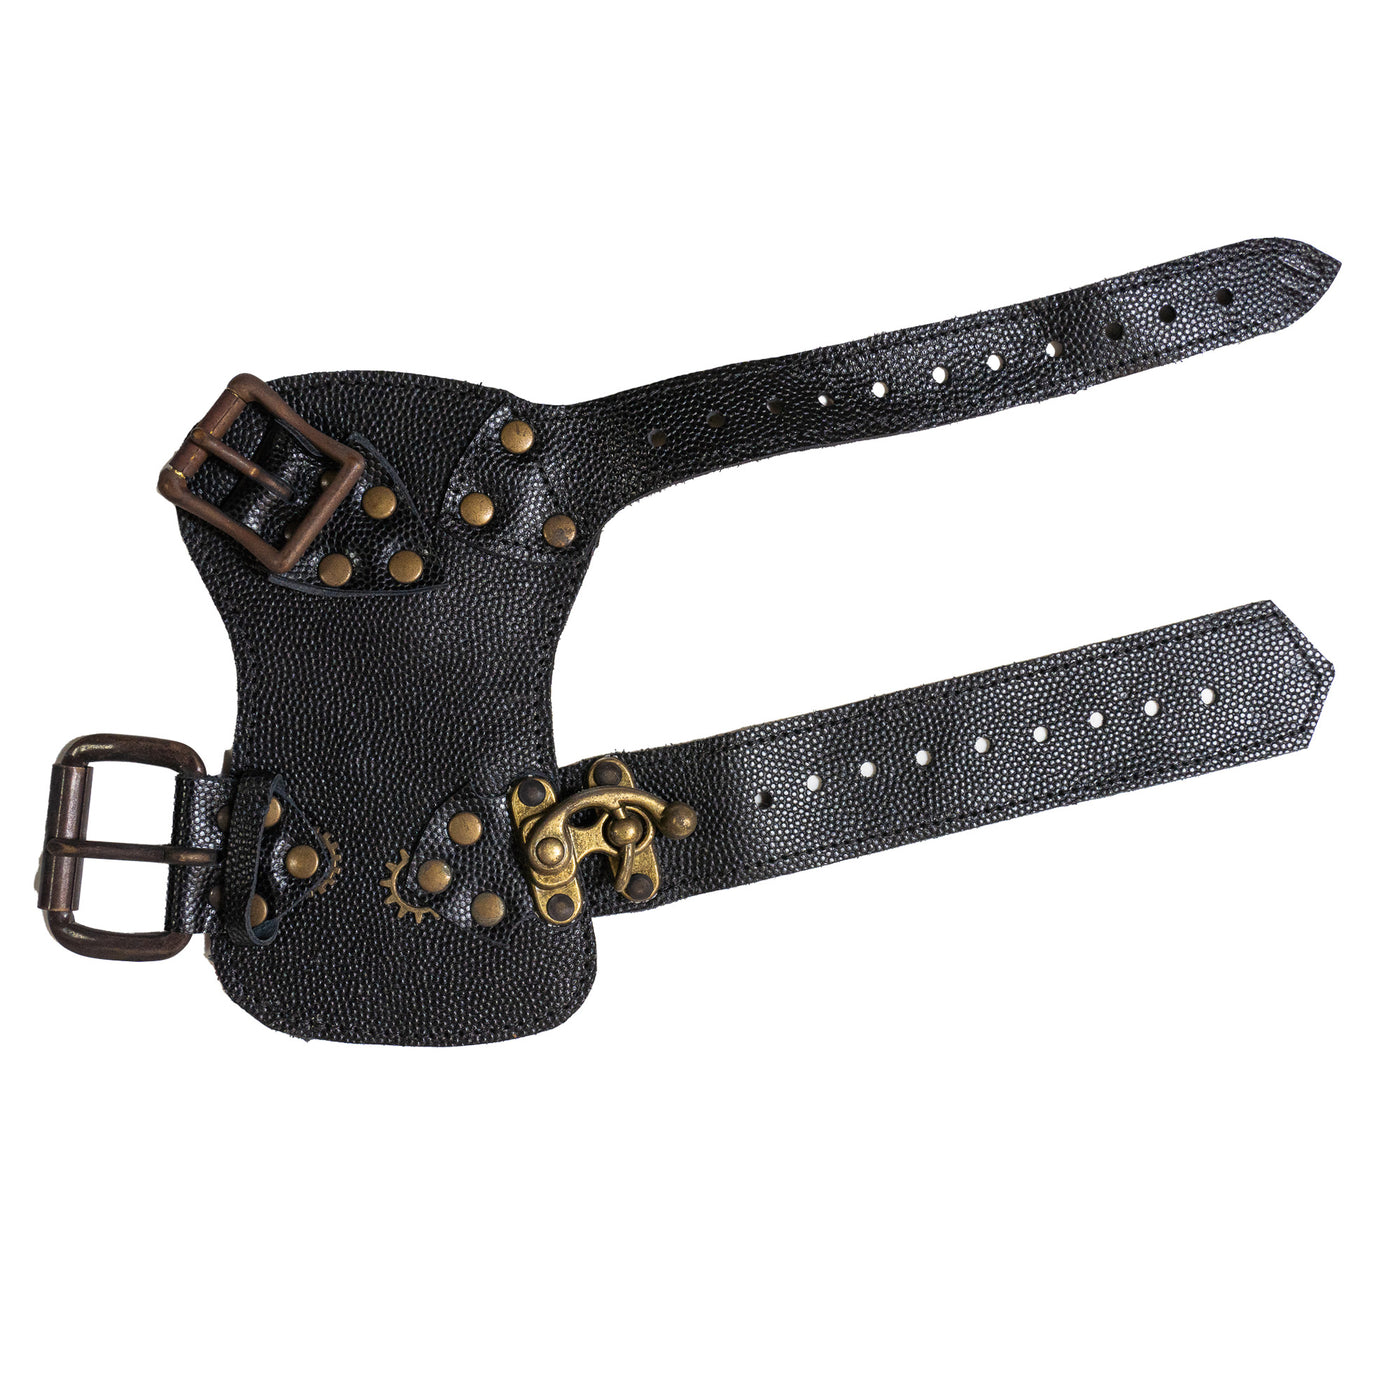 Real Leather Wrist Protector